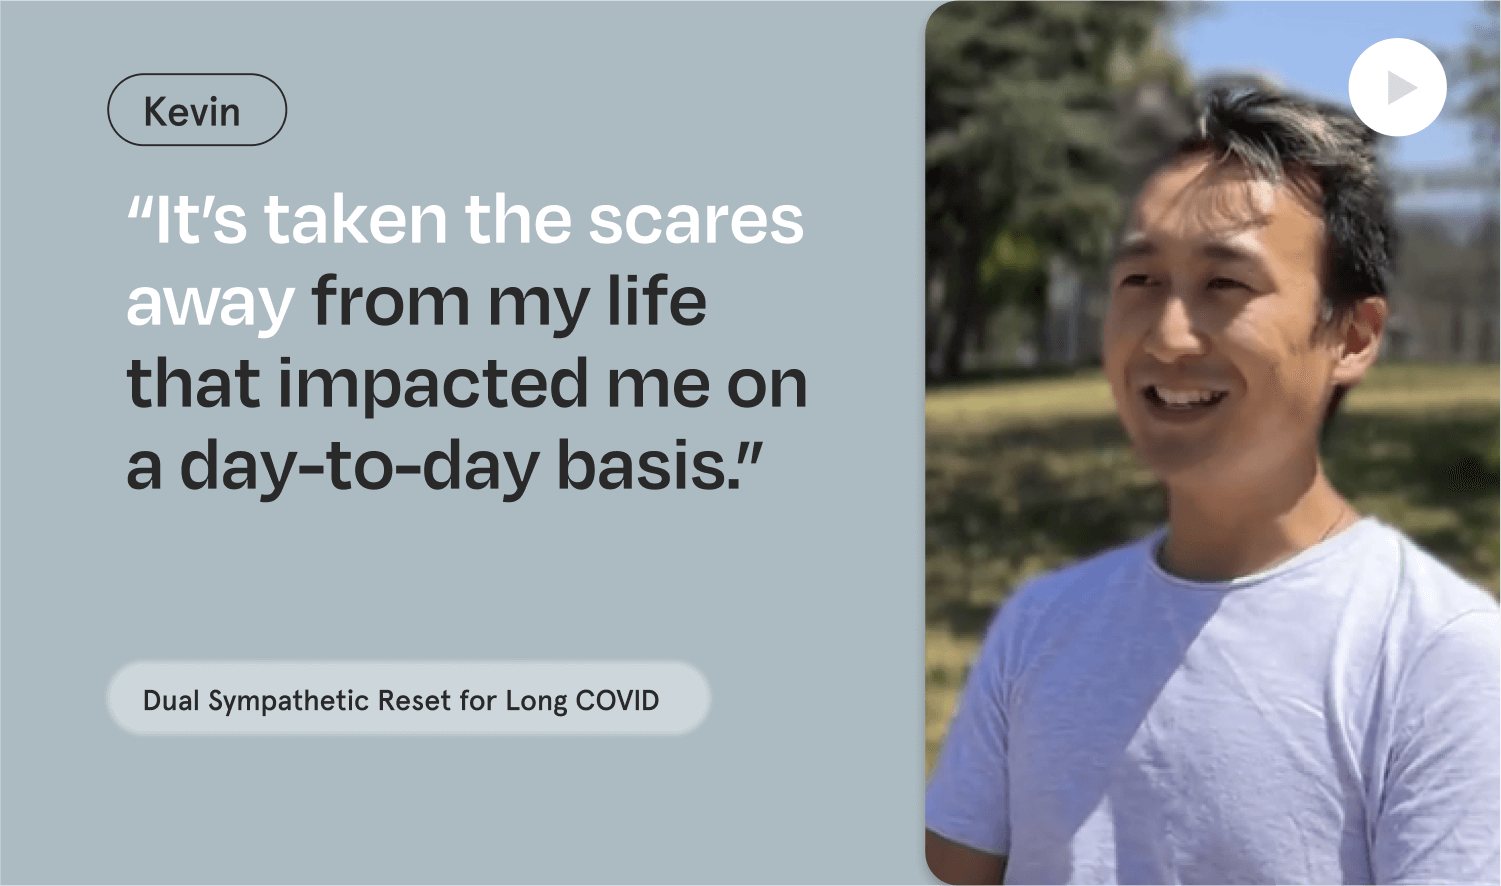 "It's taken the scares away from my life that impacted me on a day to day basis." - Kevin, Long-COVID symptoms.